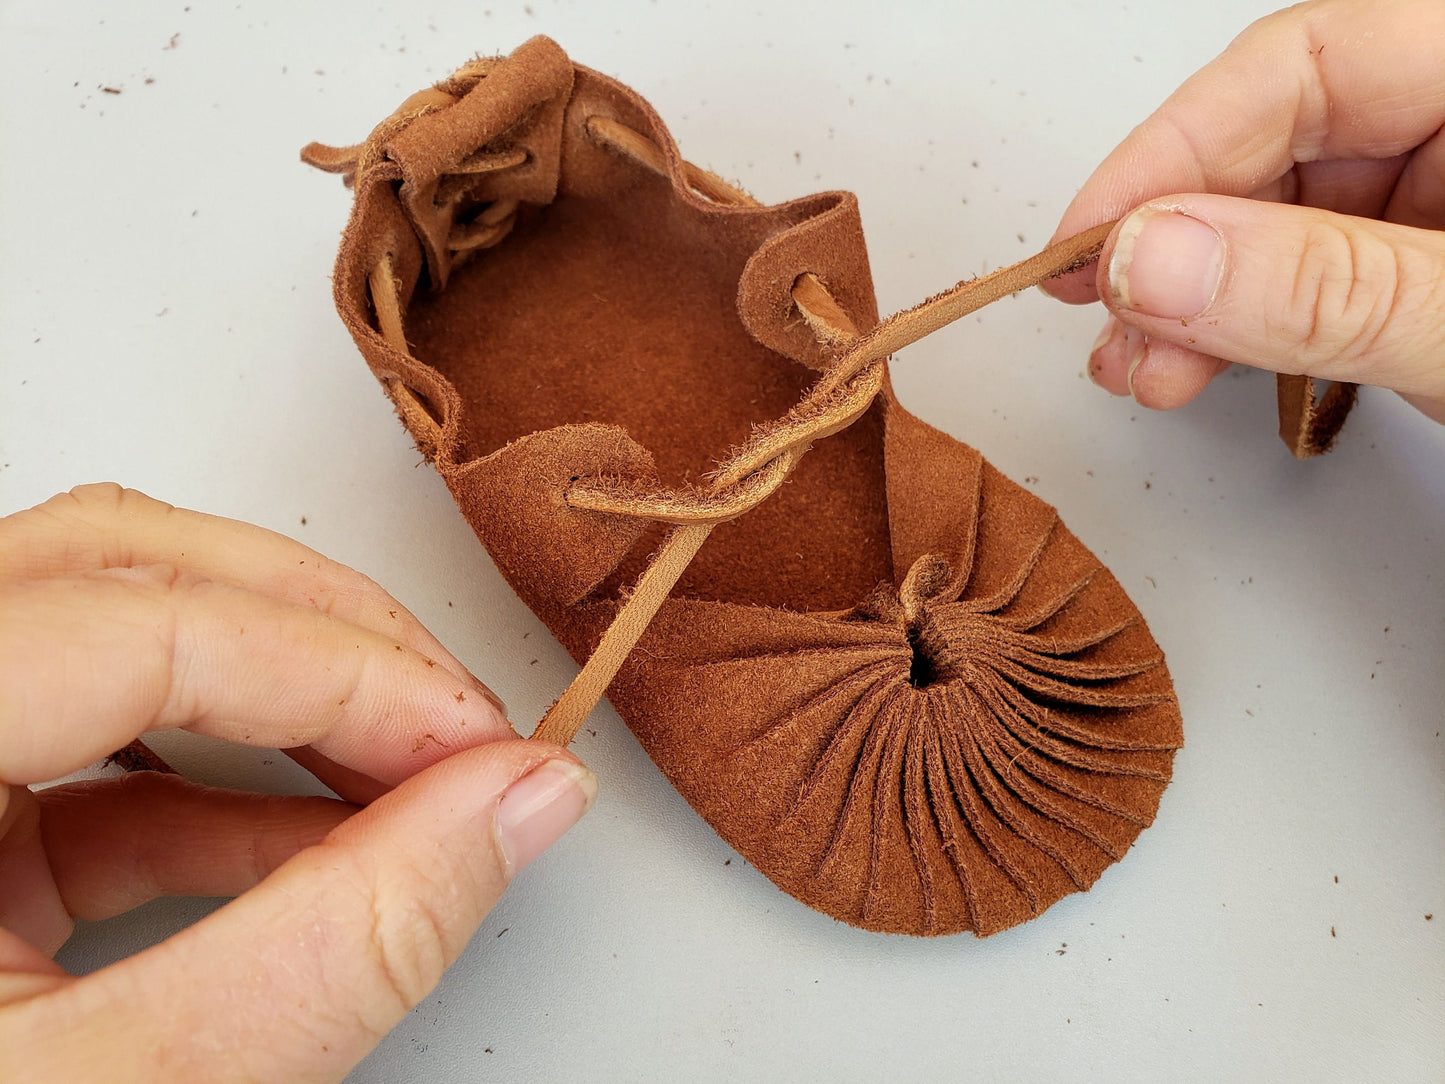 The "Sun" Sandals for Children and Baby / Soft Leather Barefoot-Shoes for Kids